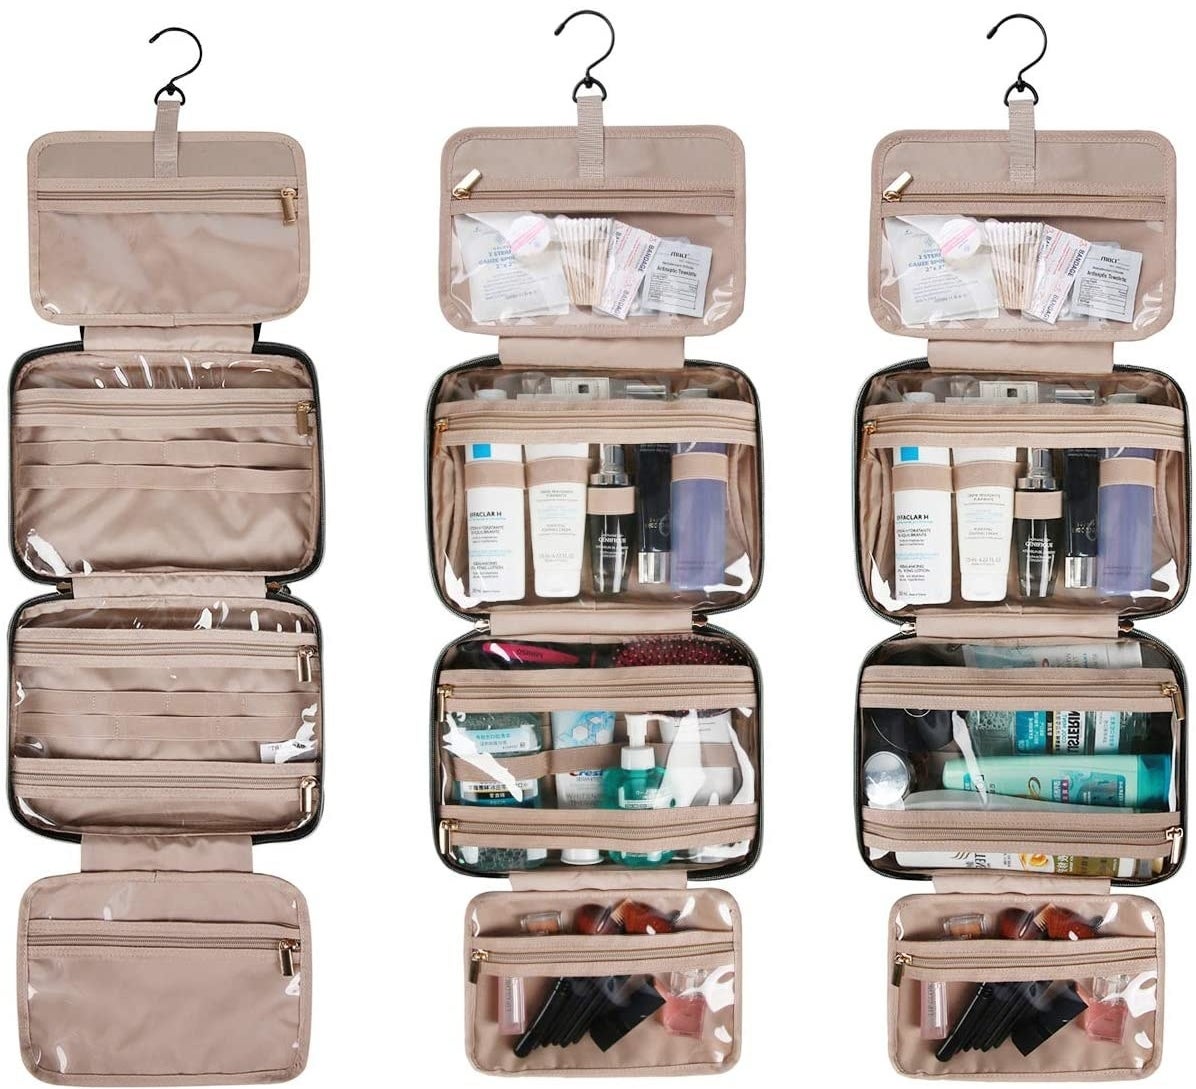 The hanging bag with four zipped-up compartments for toiletries